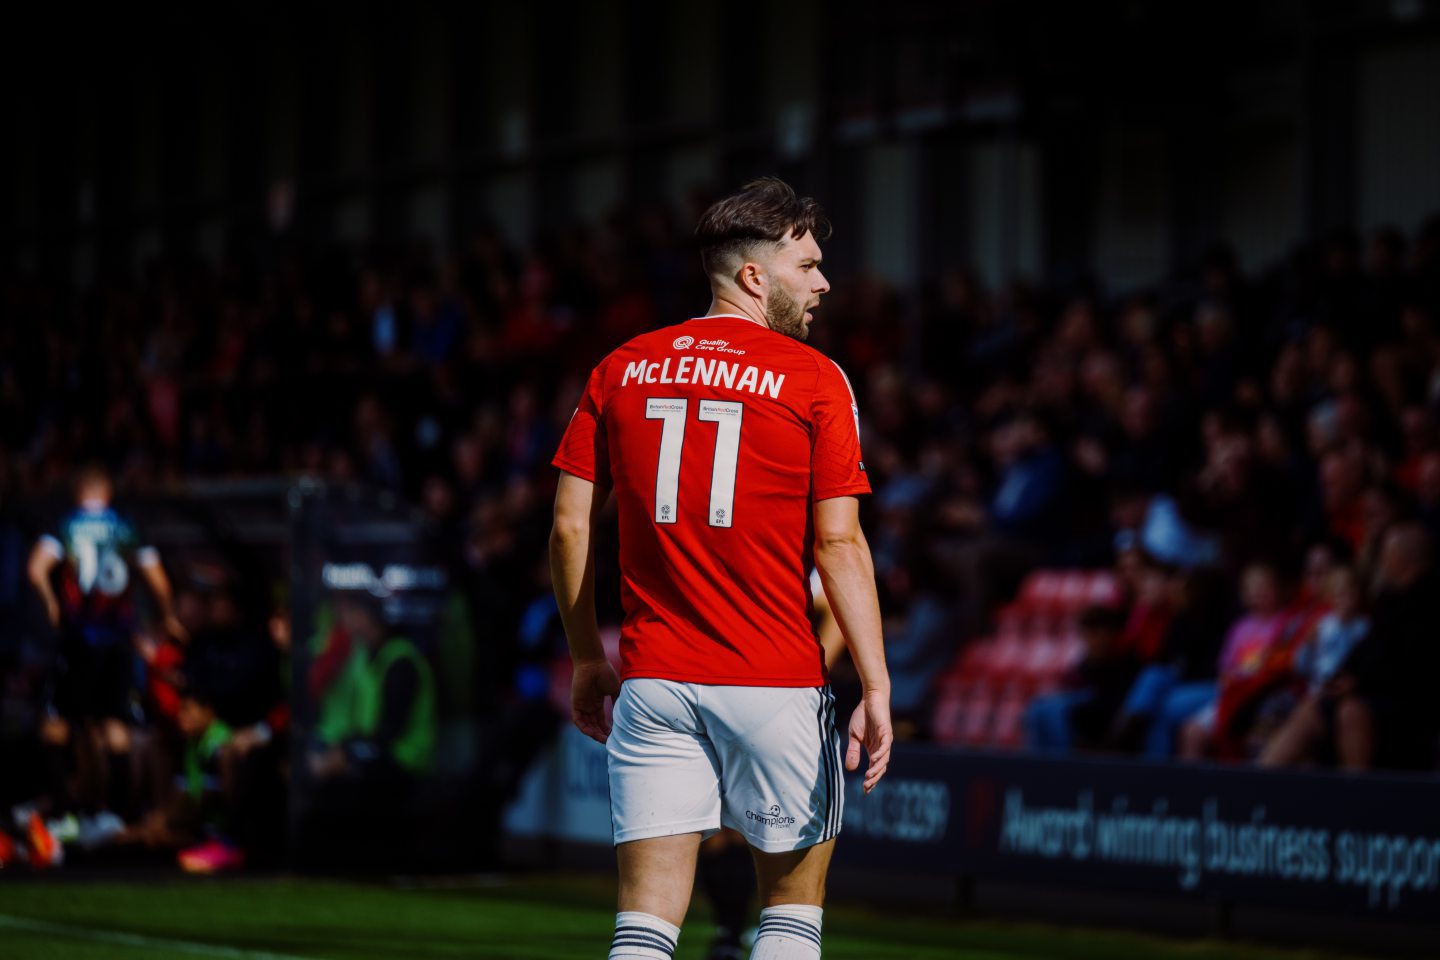 Former Aberdeen winger Connor McLennan - now at Salford City. Image supplied by Salford City